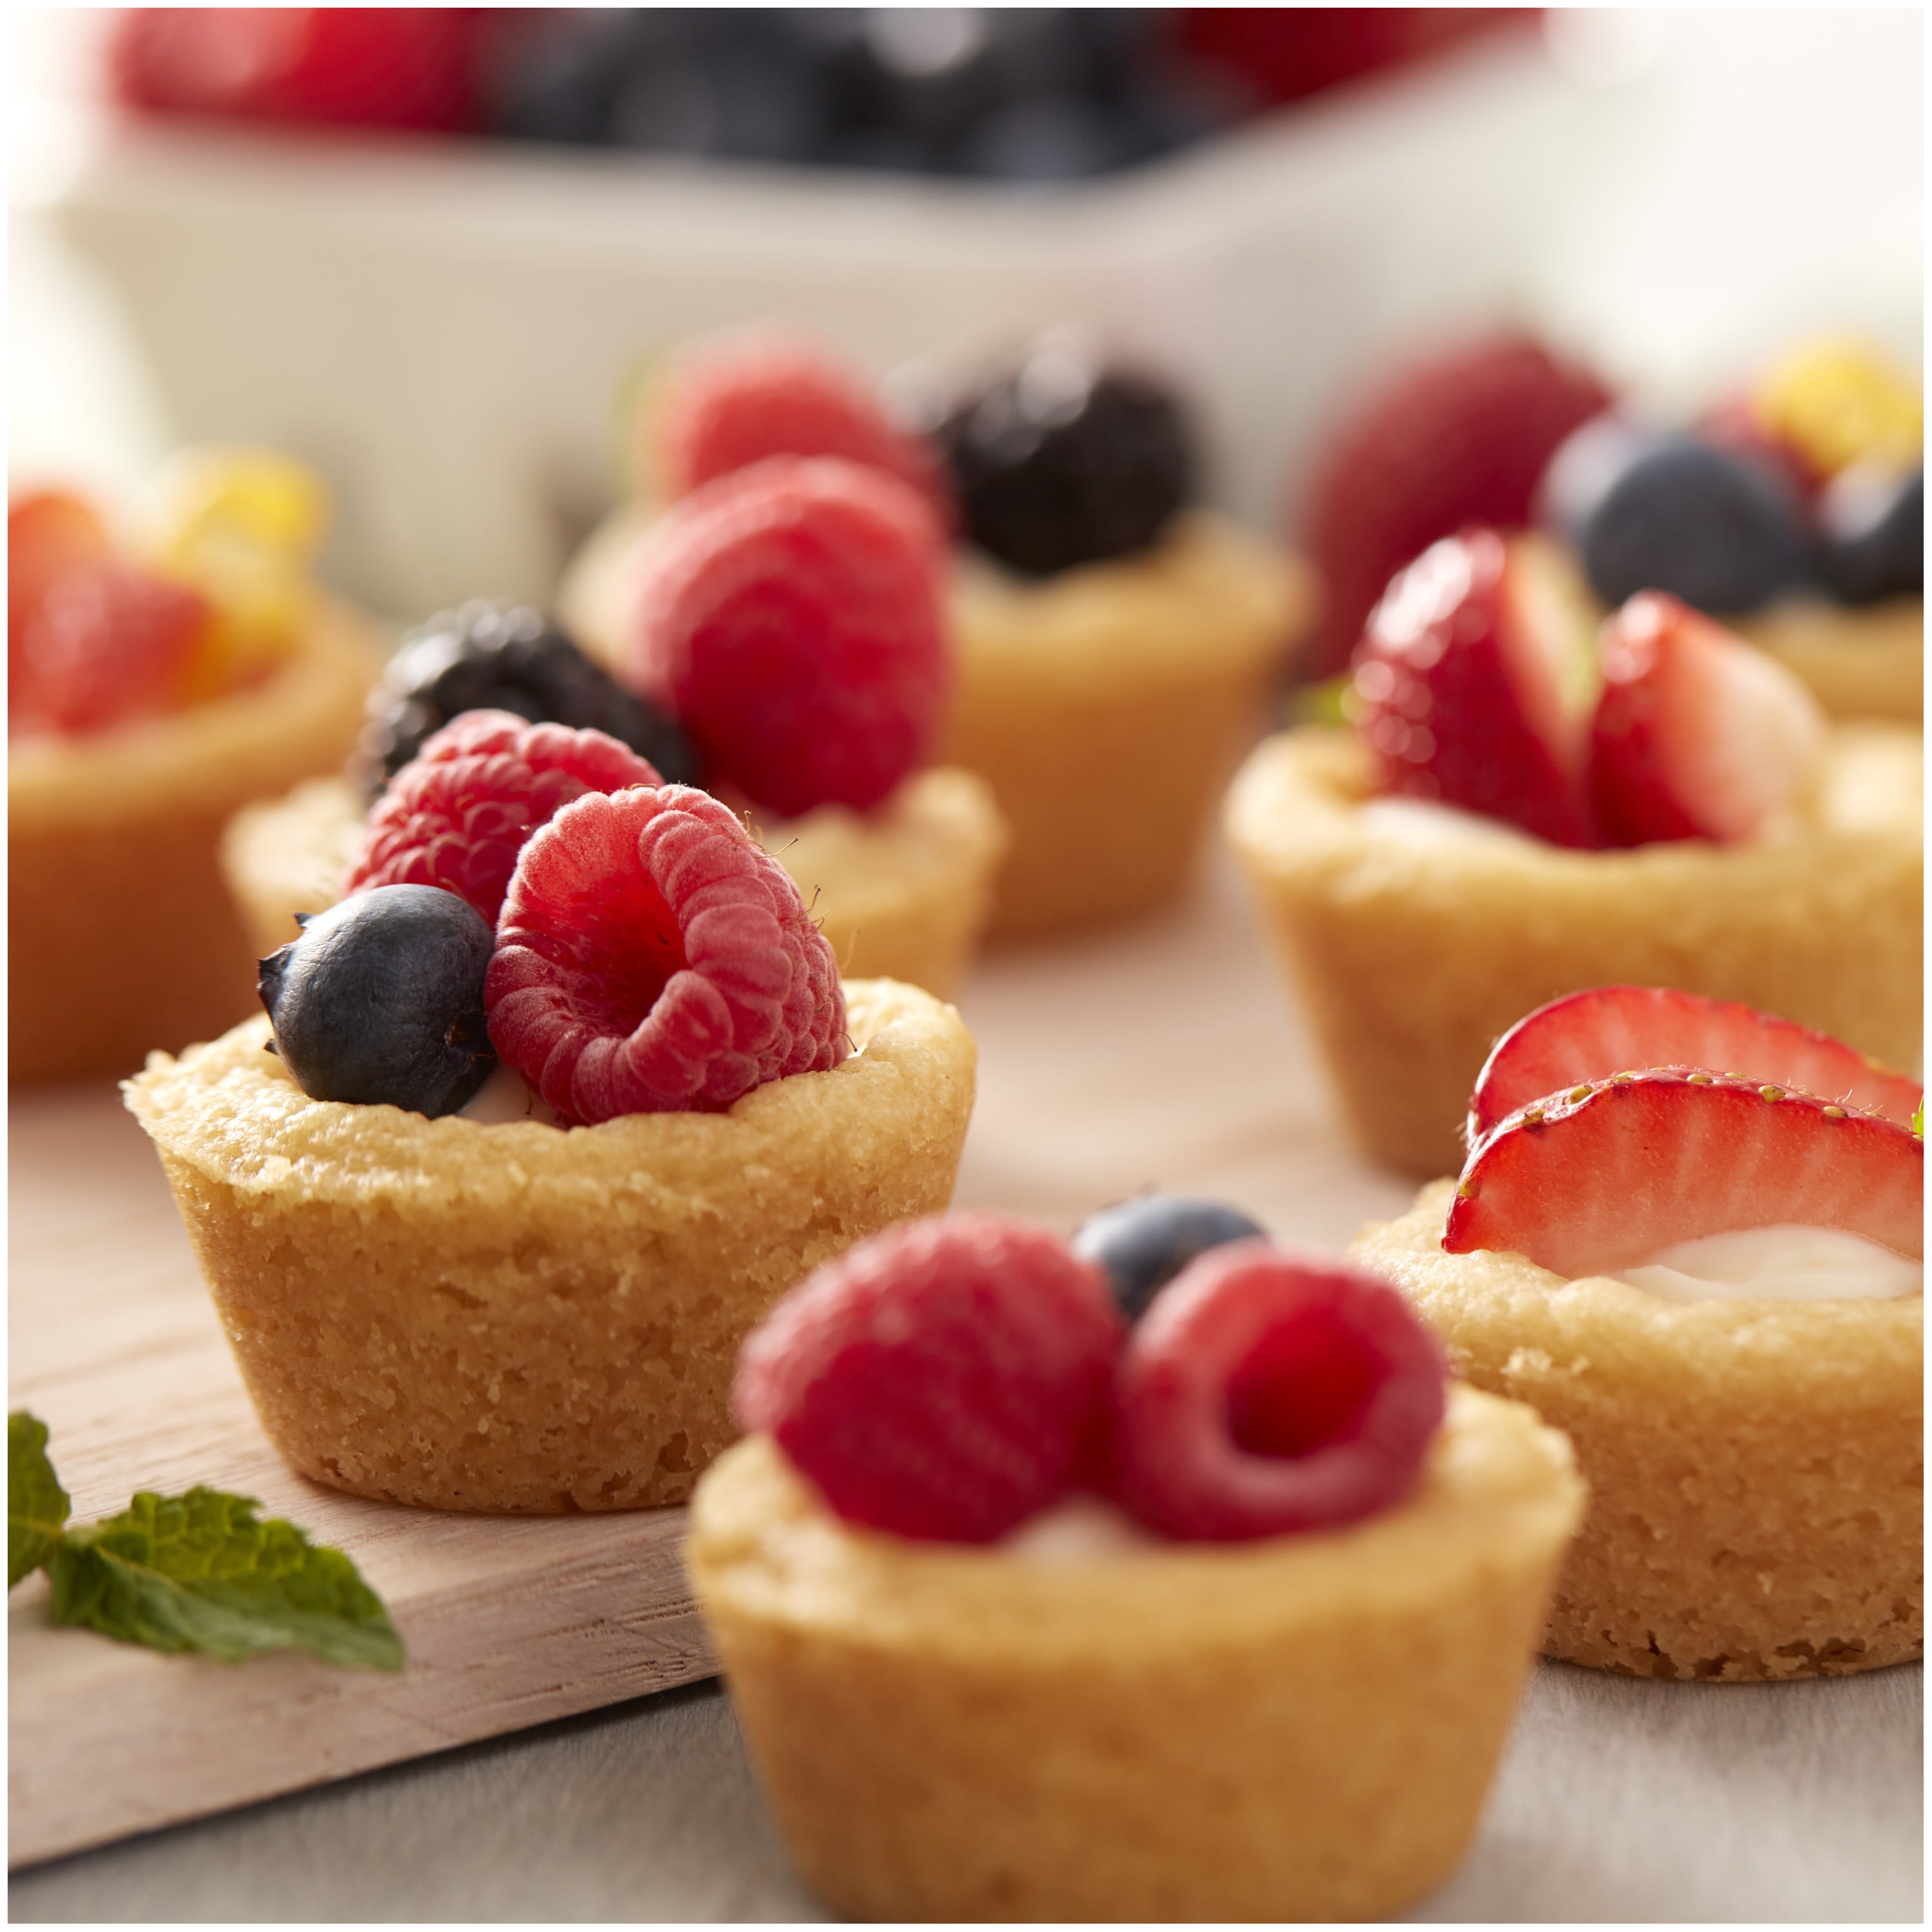 Wilton® Perfect Results Nonstick 12-Cup Muffin Pan, 1 ct - Kroger